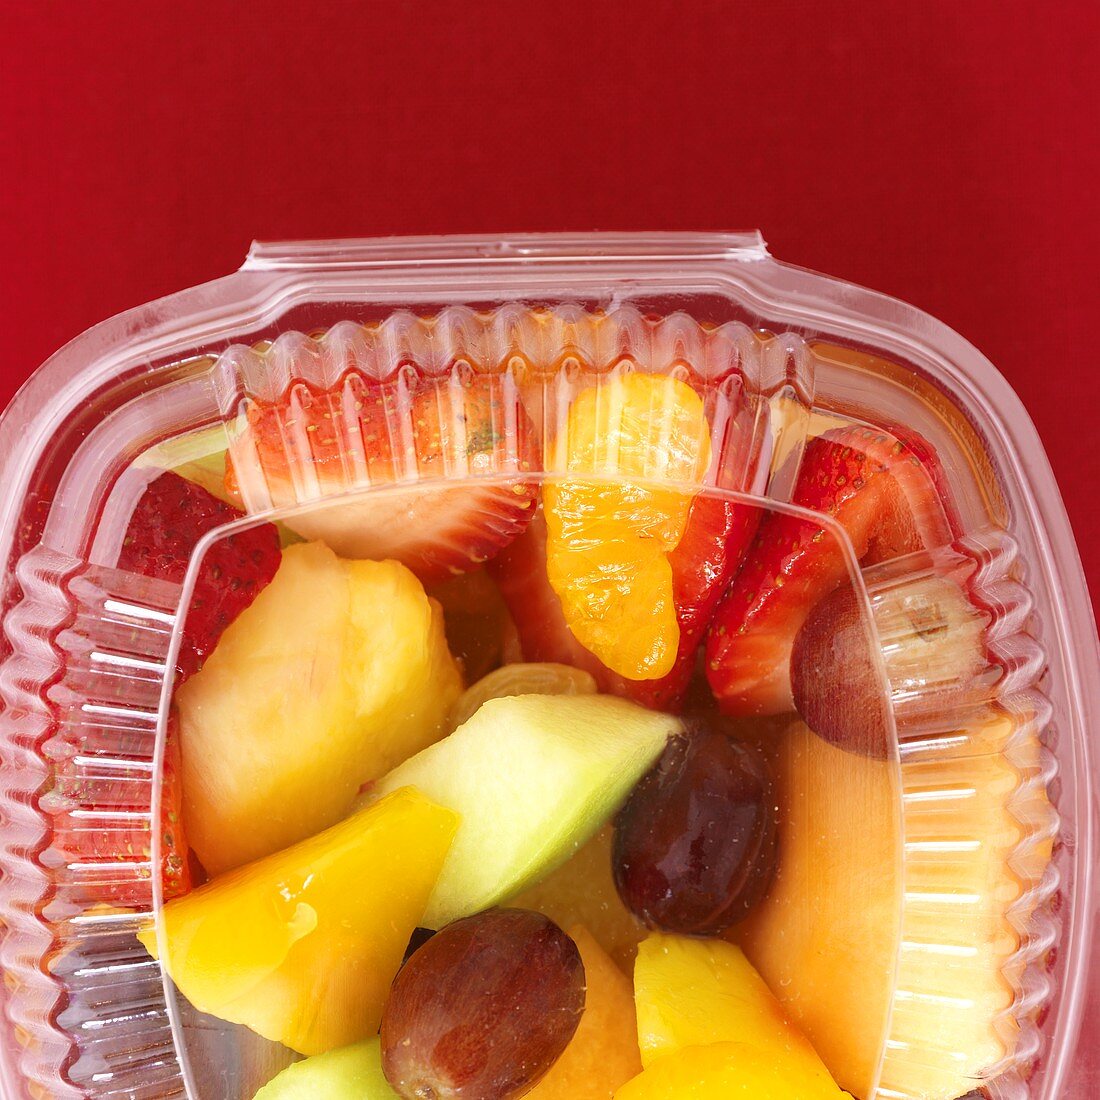 https://media02.stockfood.com/largepreviews/MjY3ODYzODc=/00864077-Fruit-salad-in-a-plastic-container.jpg